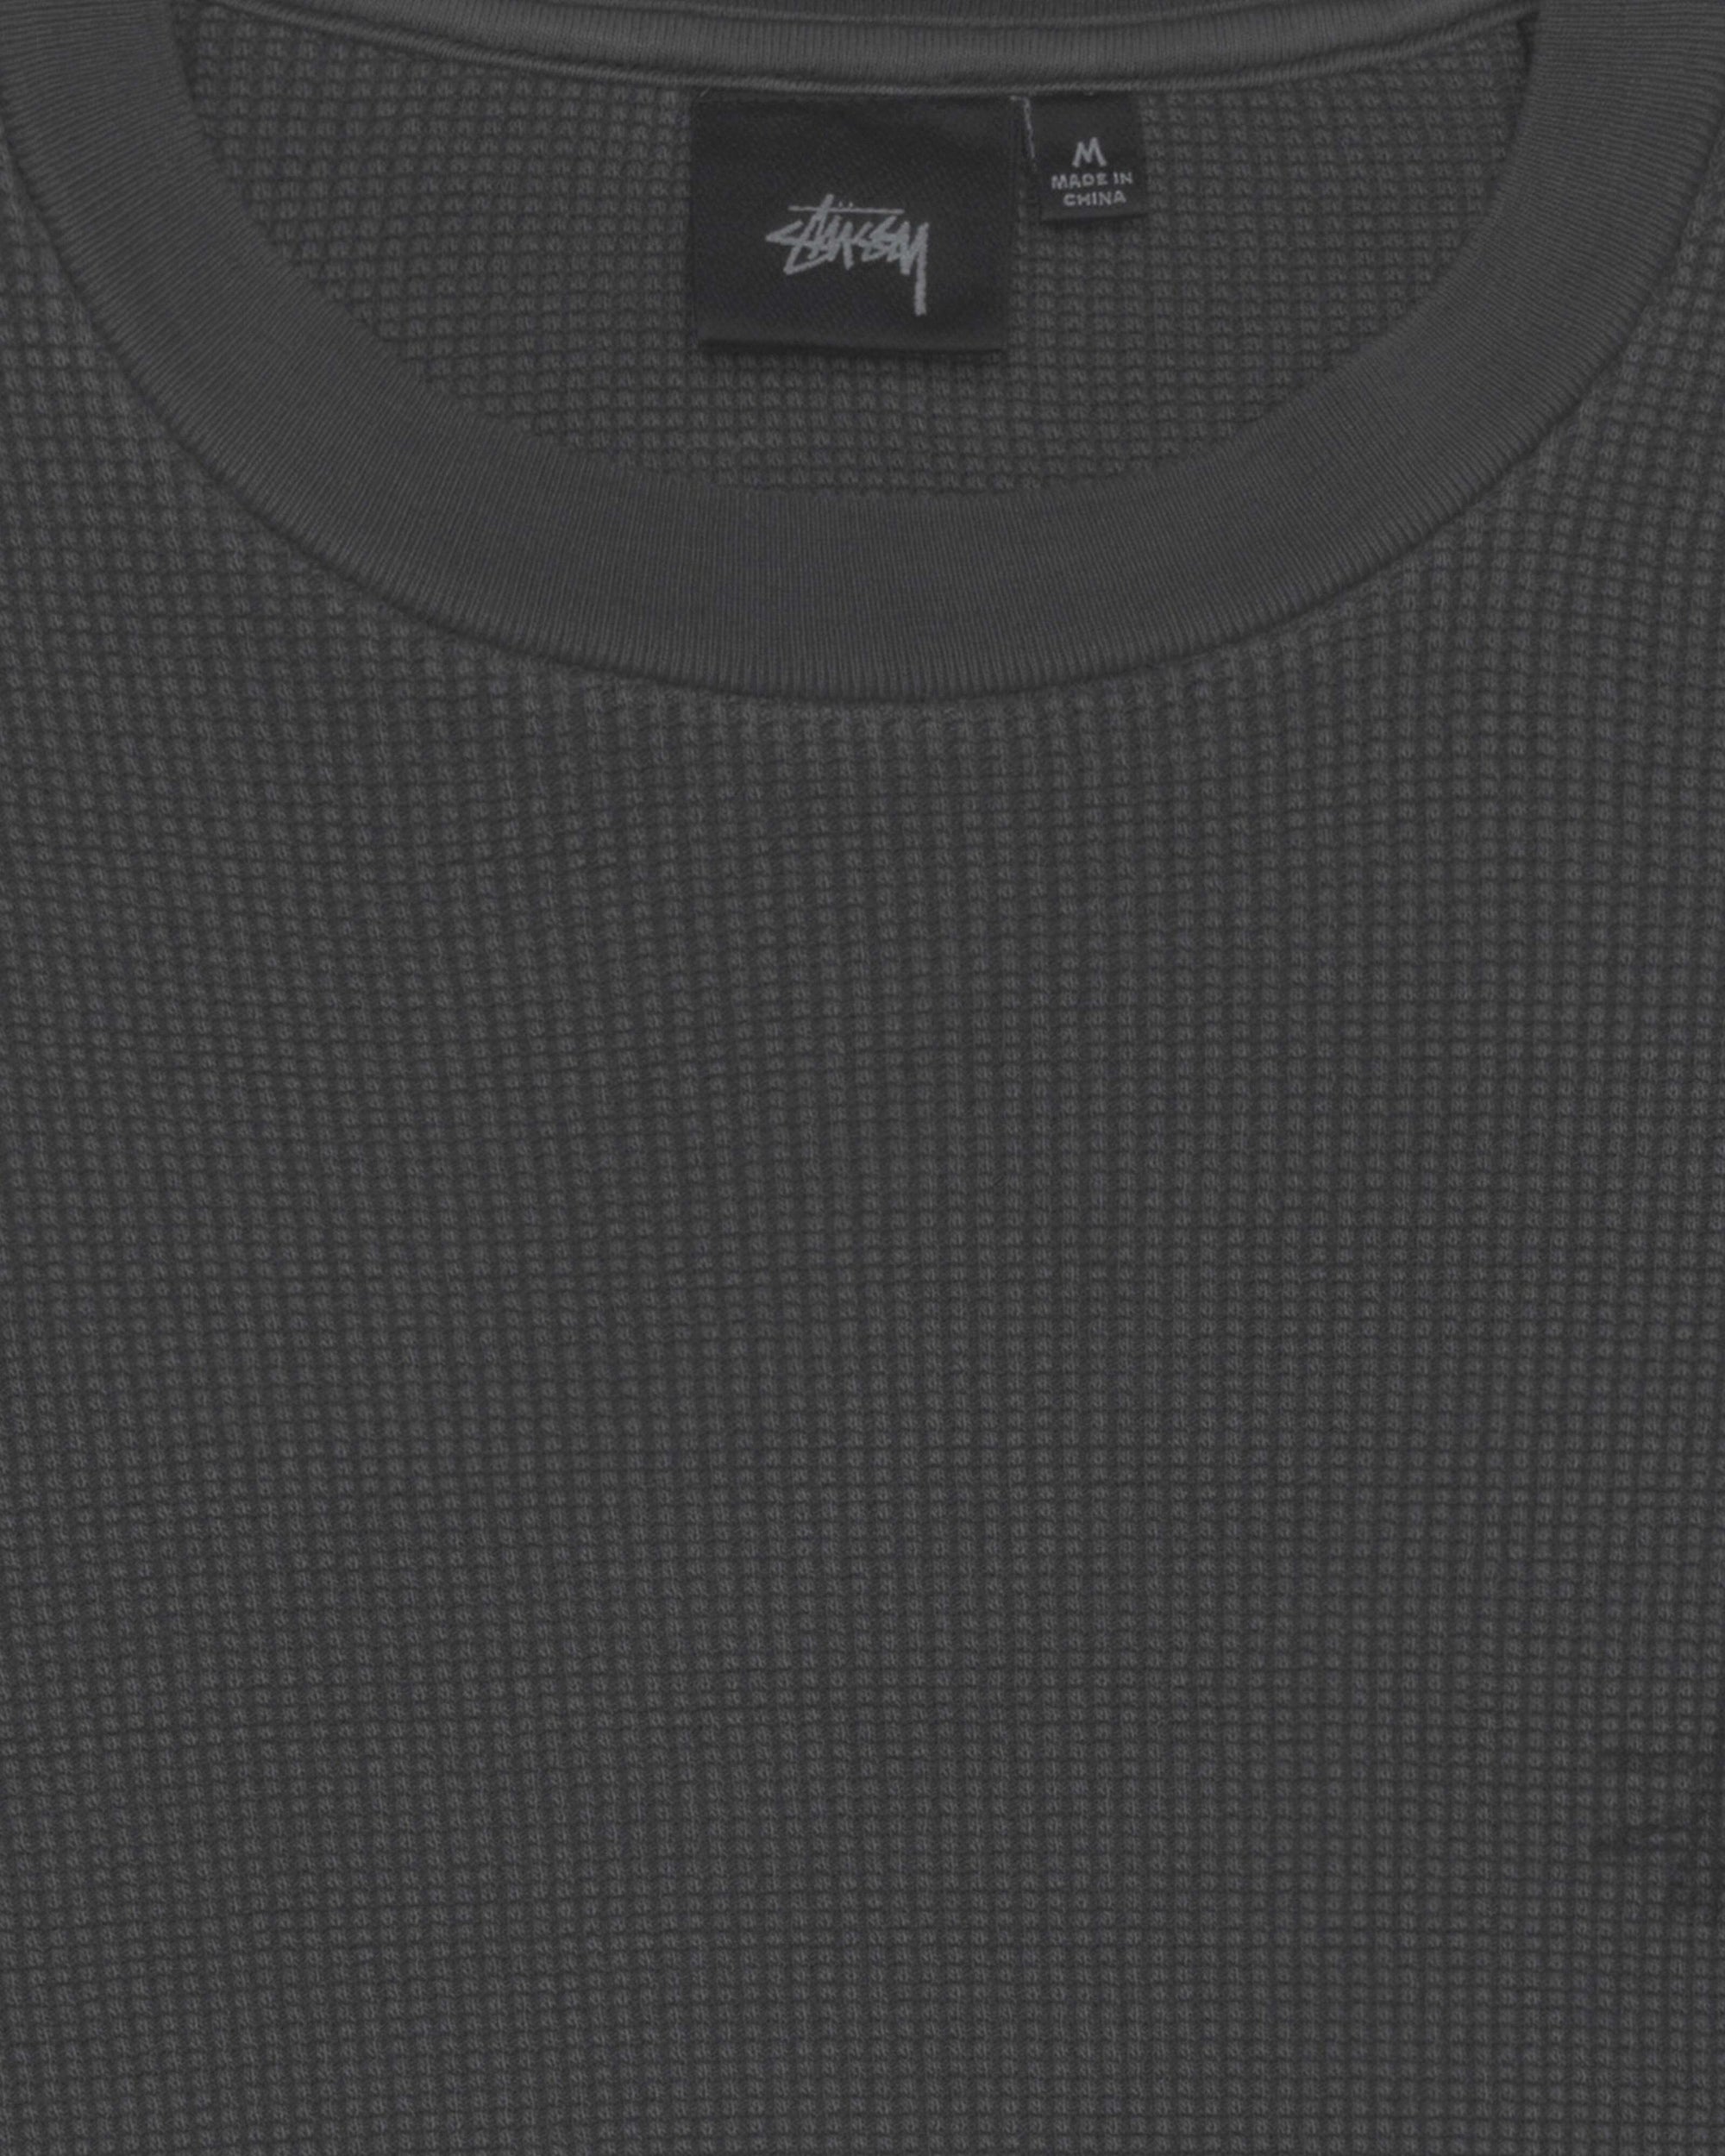 Stüssy - Basic Stock Ls Thermal - (Washed Black) view 3